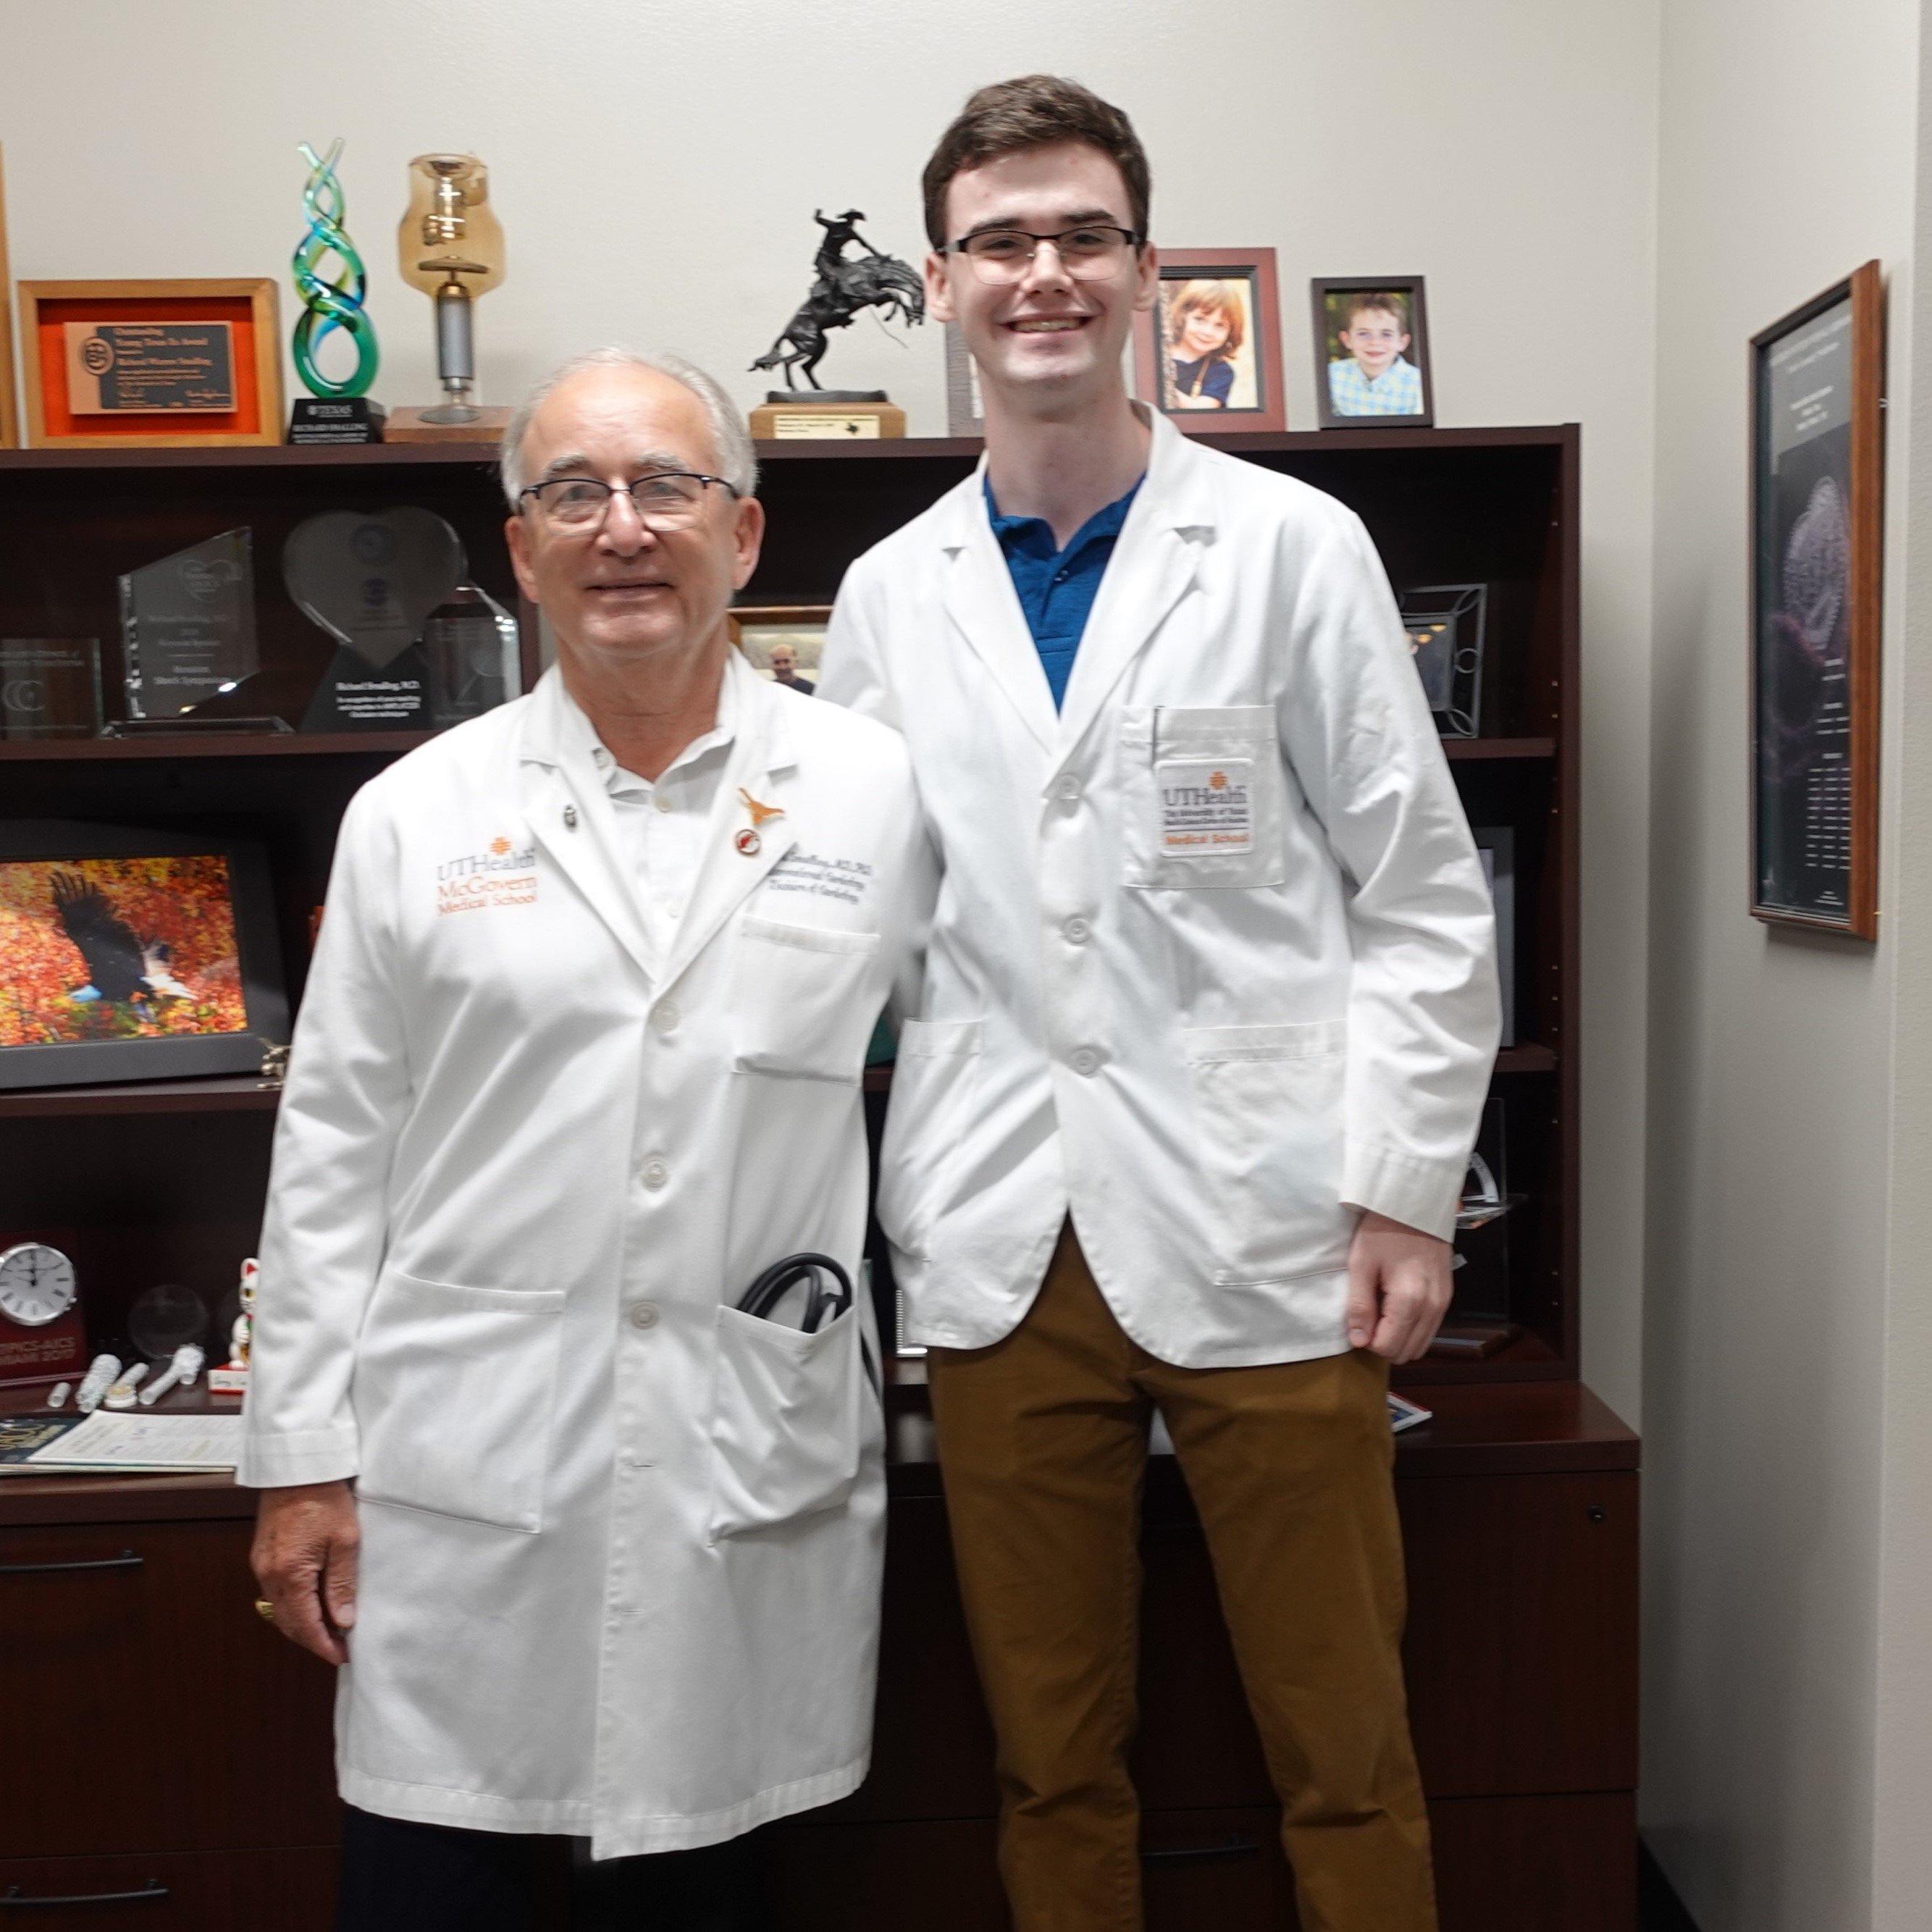 One of the four selected for the Mary Ann Lunsford Student Summer Externship, Carson Benner, 22, (right) learned more about cardiovascular medicine from Richard W. Smalling, MD, PhD, (left) professor with UTHealth Houston. (Photo by UTHealth Houston)